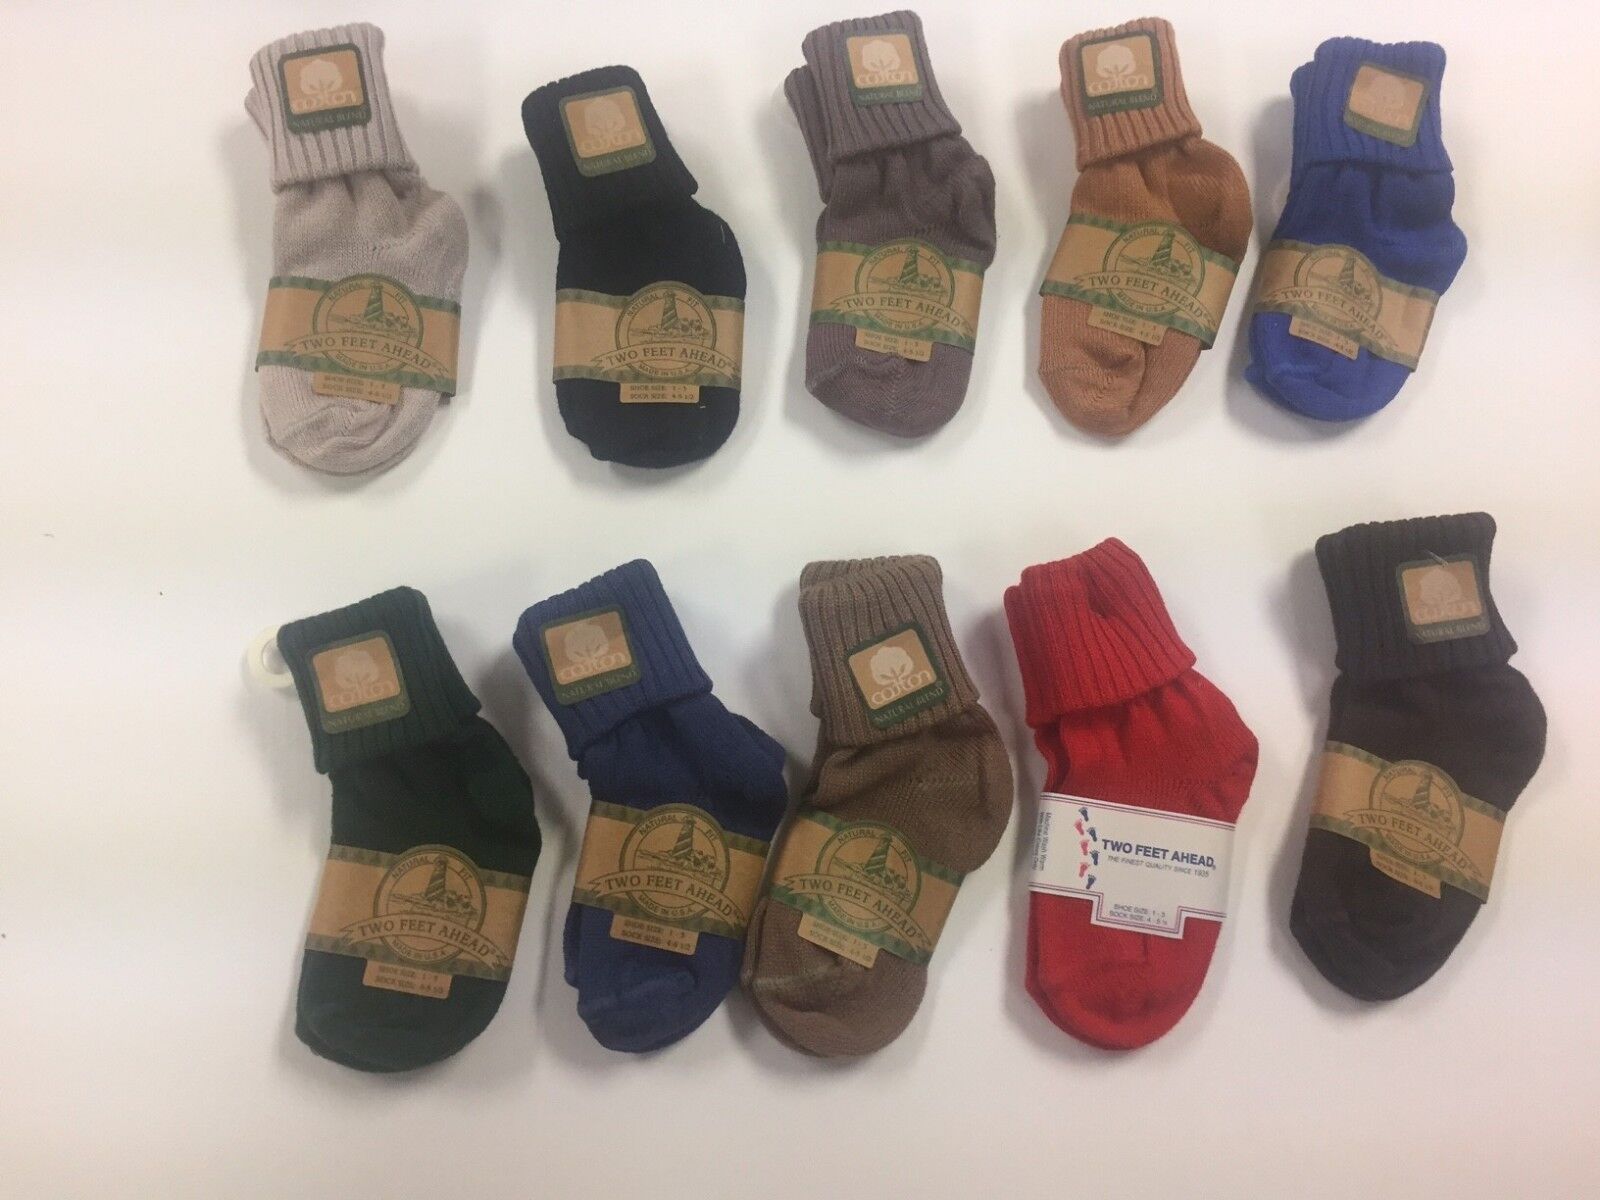 Baby socks  size 4-5 (6-12mo) , 10pc lot assorted colors   $5.00 lot Two Feet Ahead